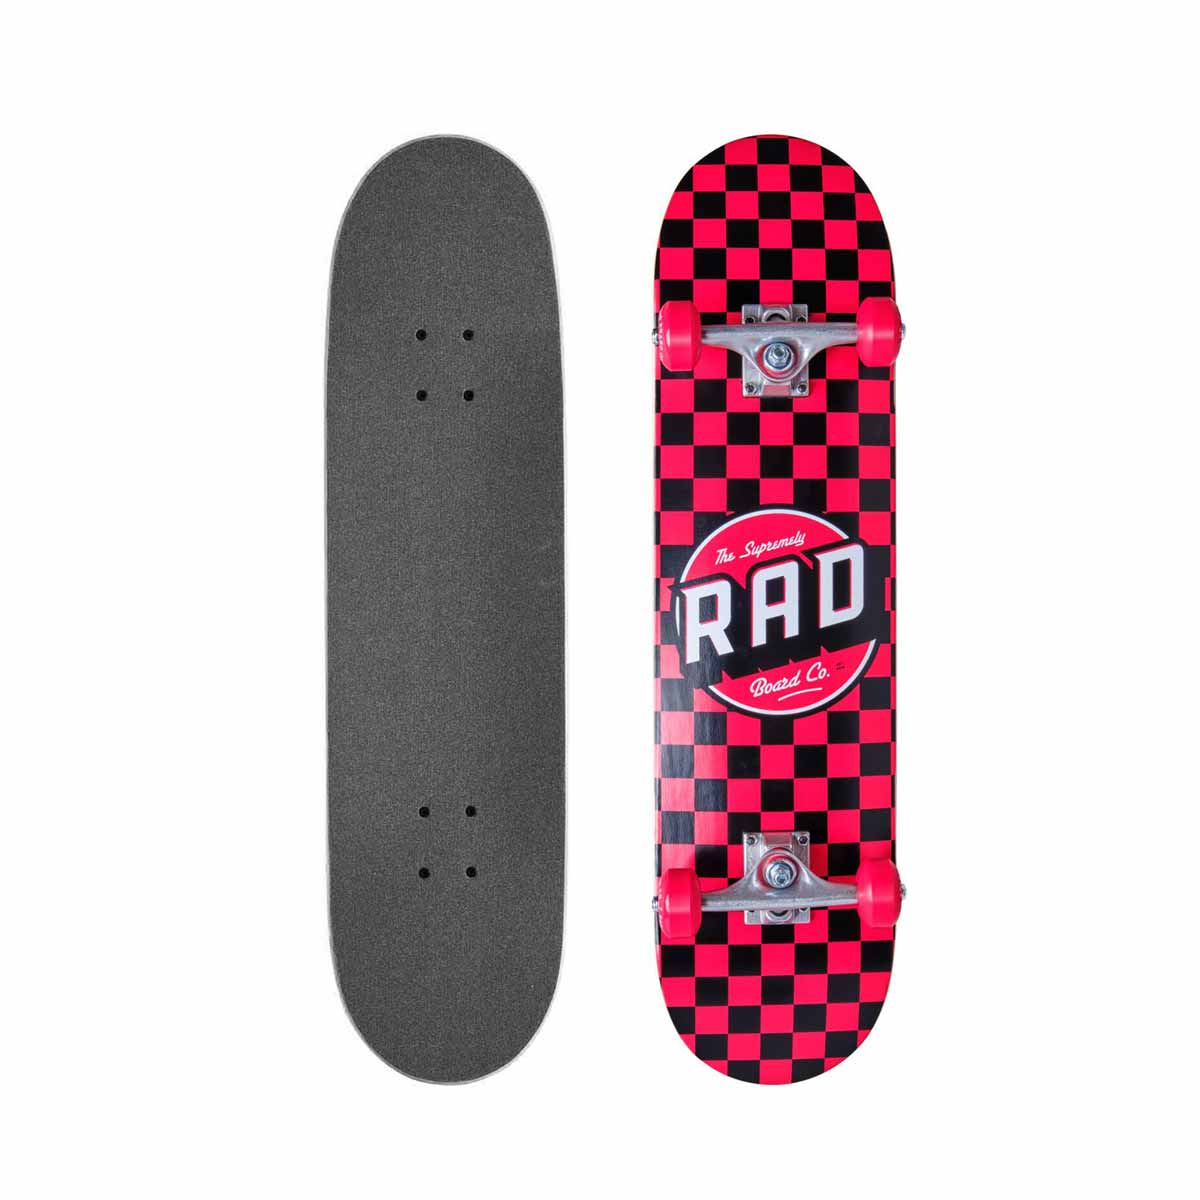 Rad Checkers Red Complete Skateboard – 7.75